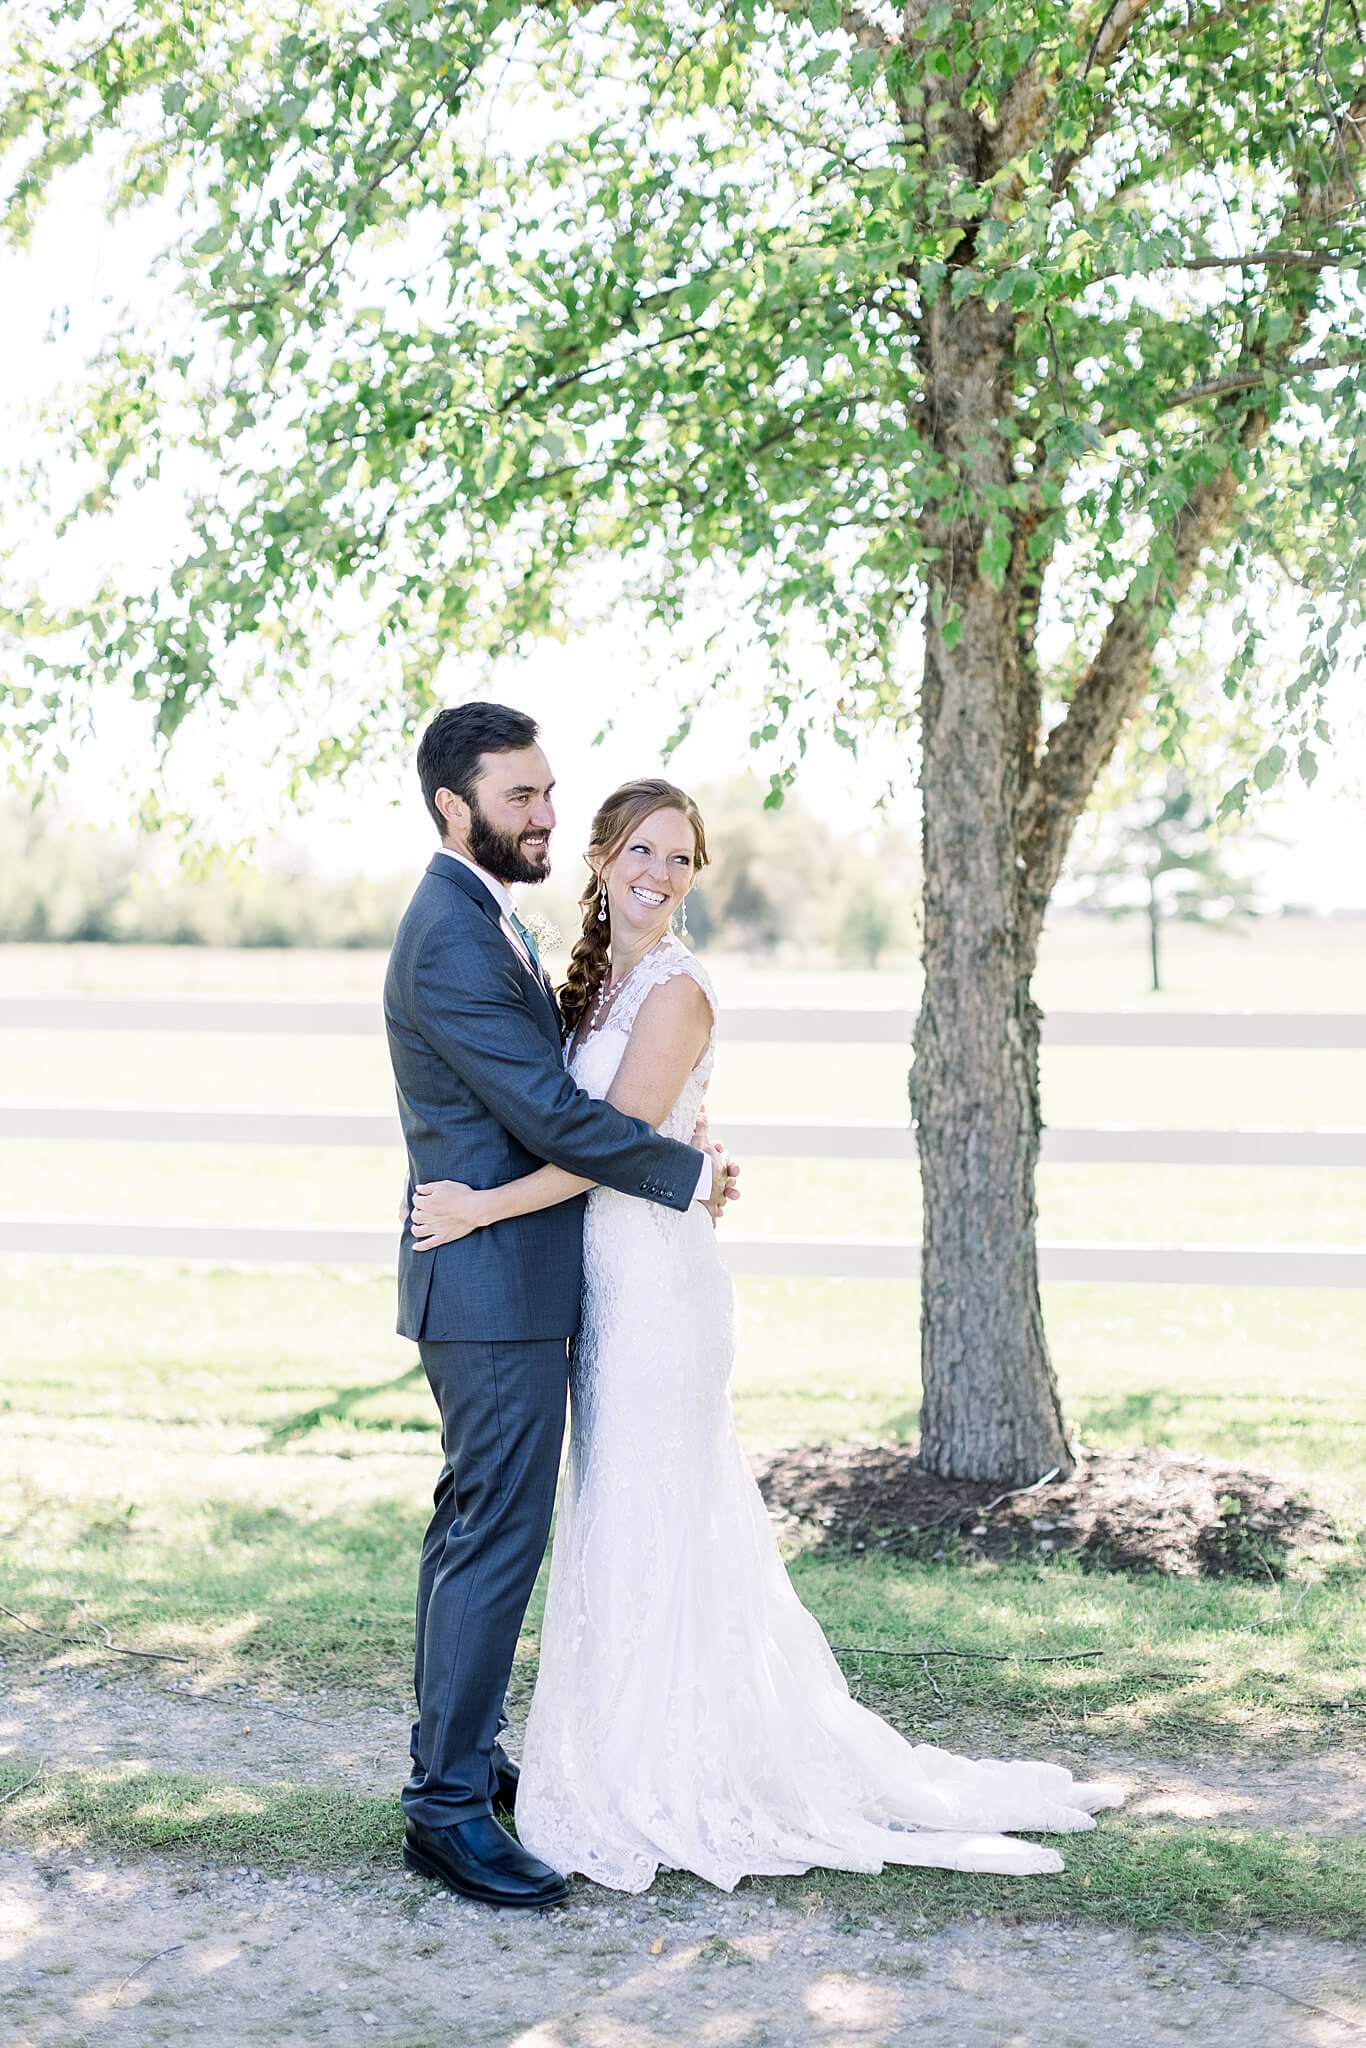 Bride and groom embrace and smile during first look at Crooked Creek Ranch wedding.